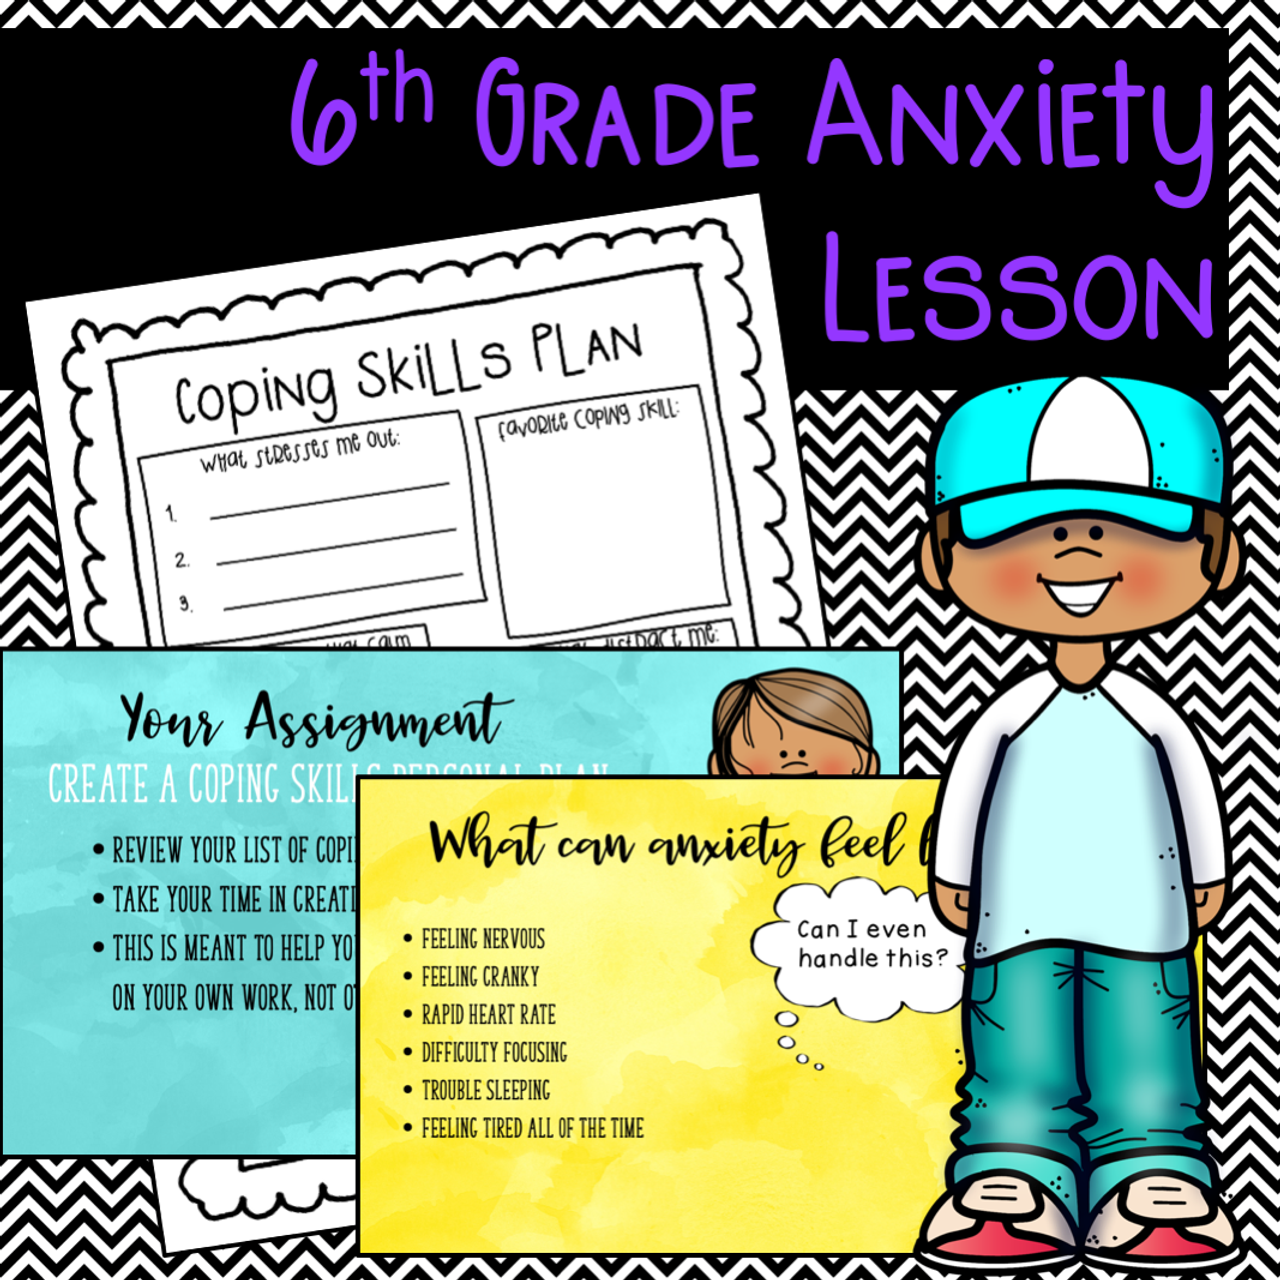 6th Grade Anxiety Lesson